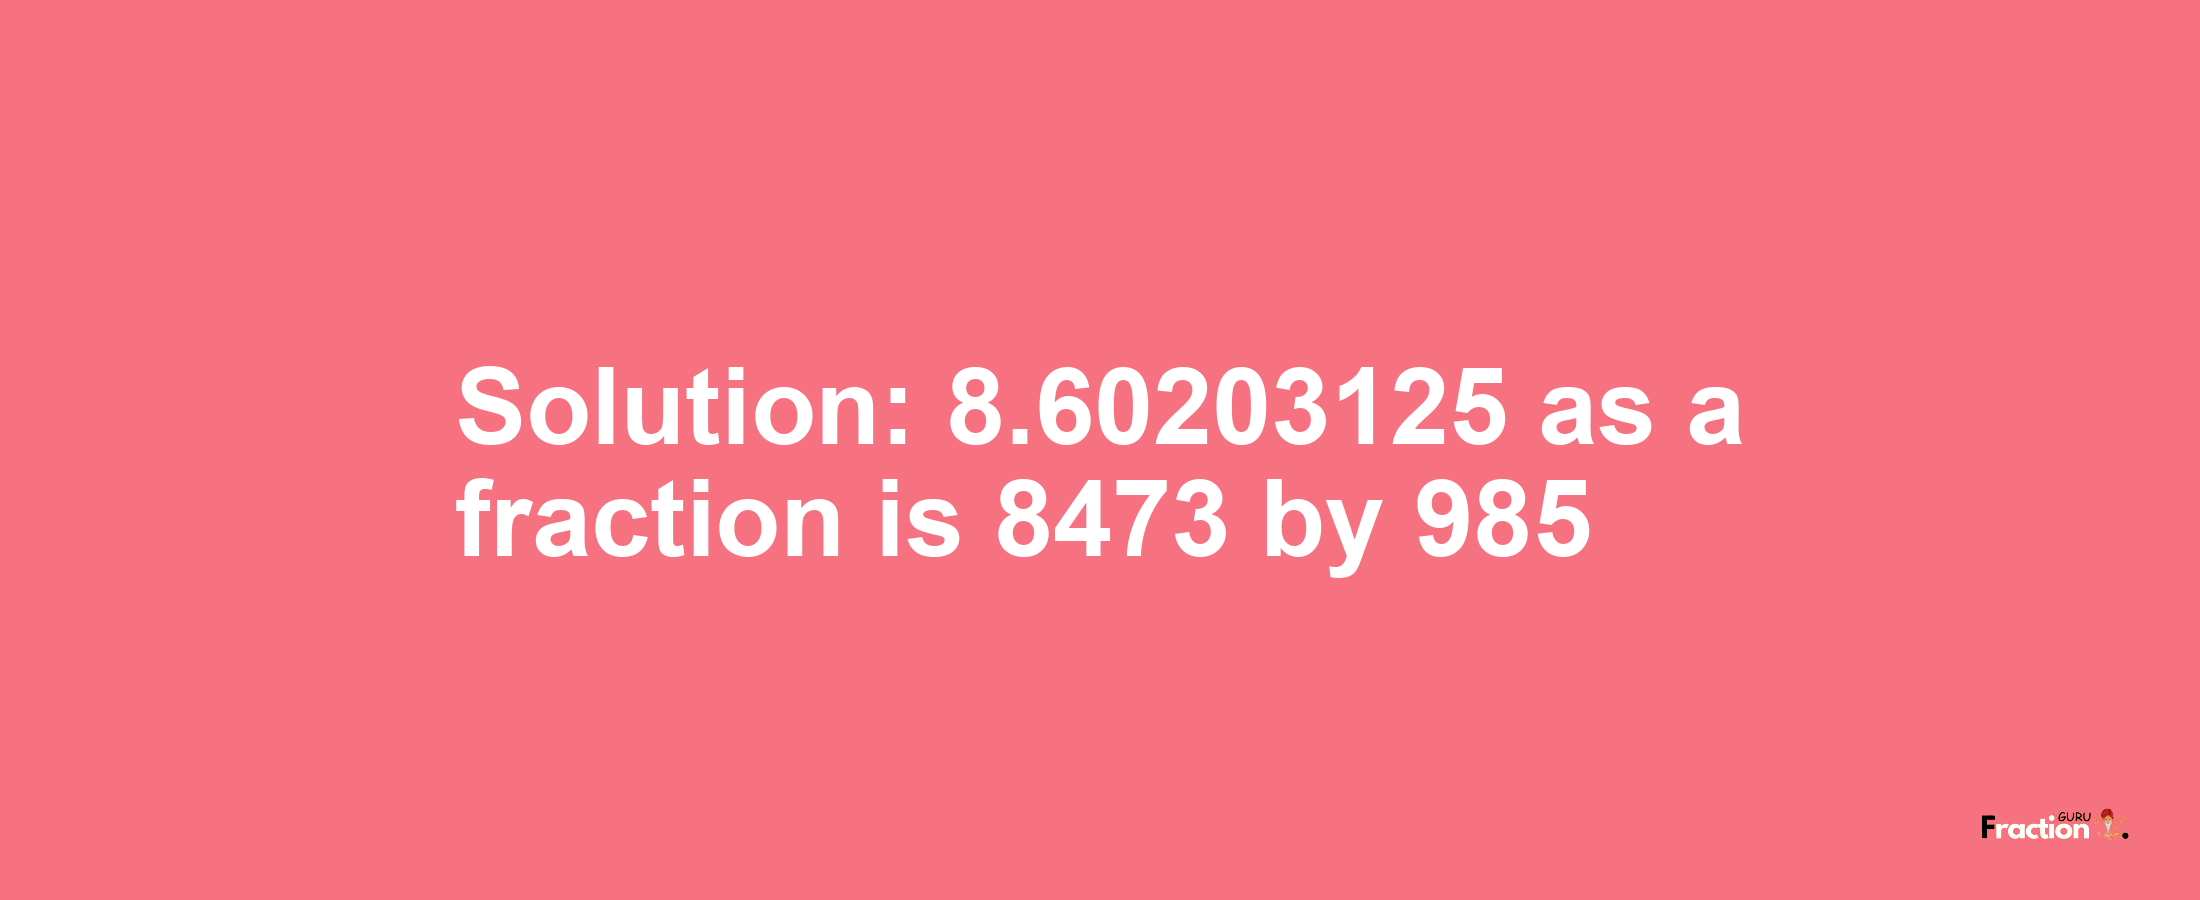 Solution:8.60203125 as a fraction is 8473/985